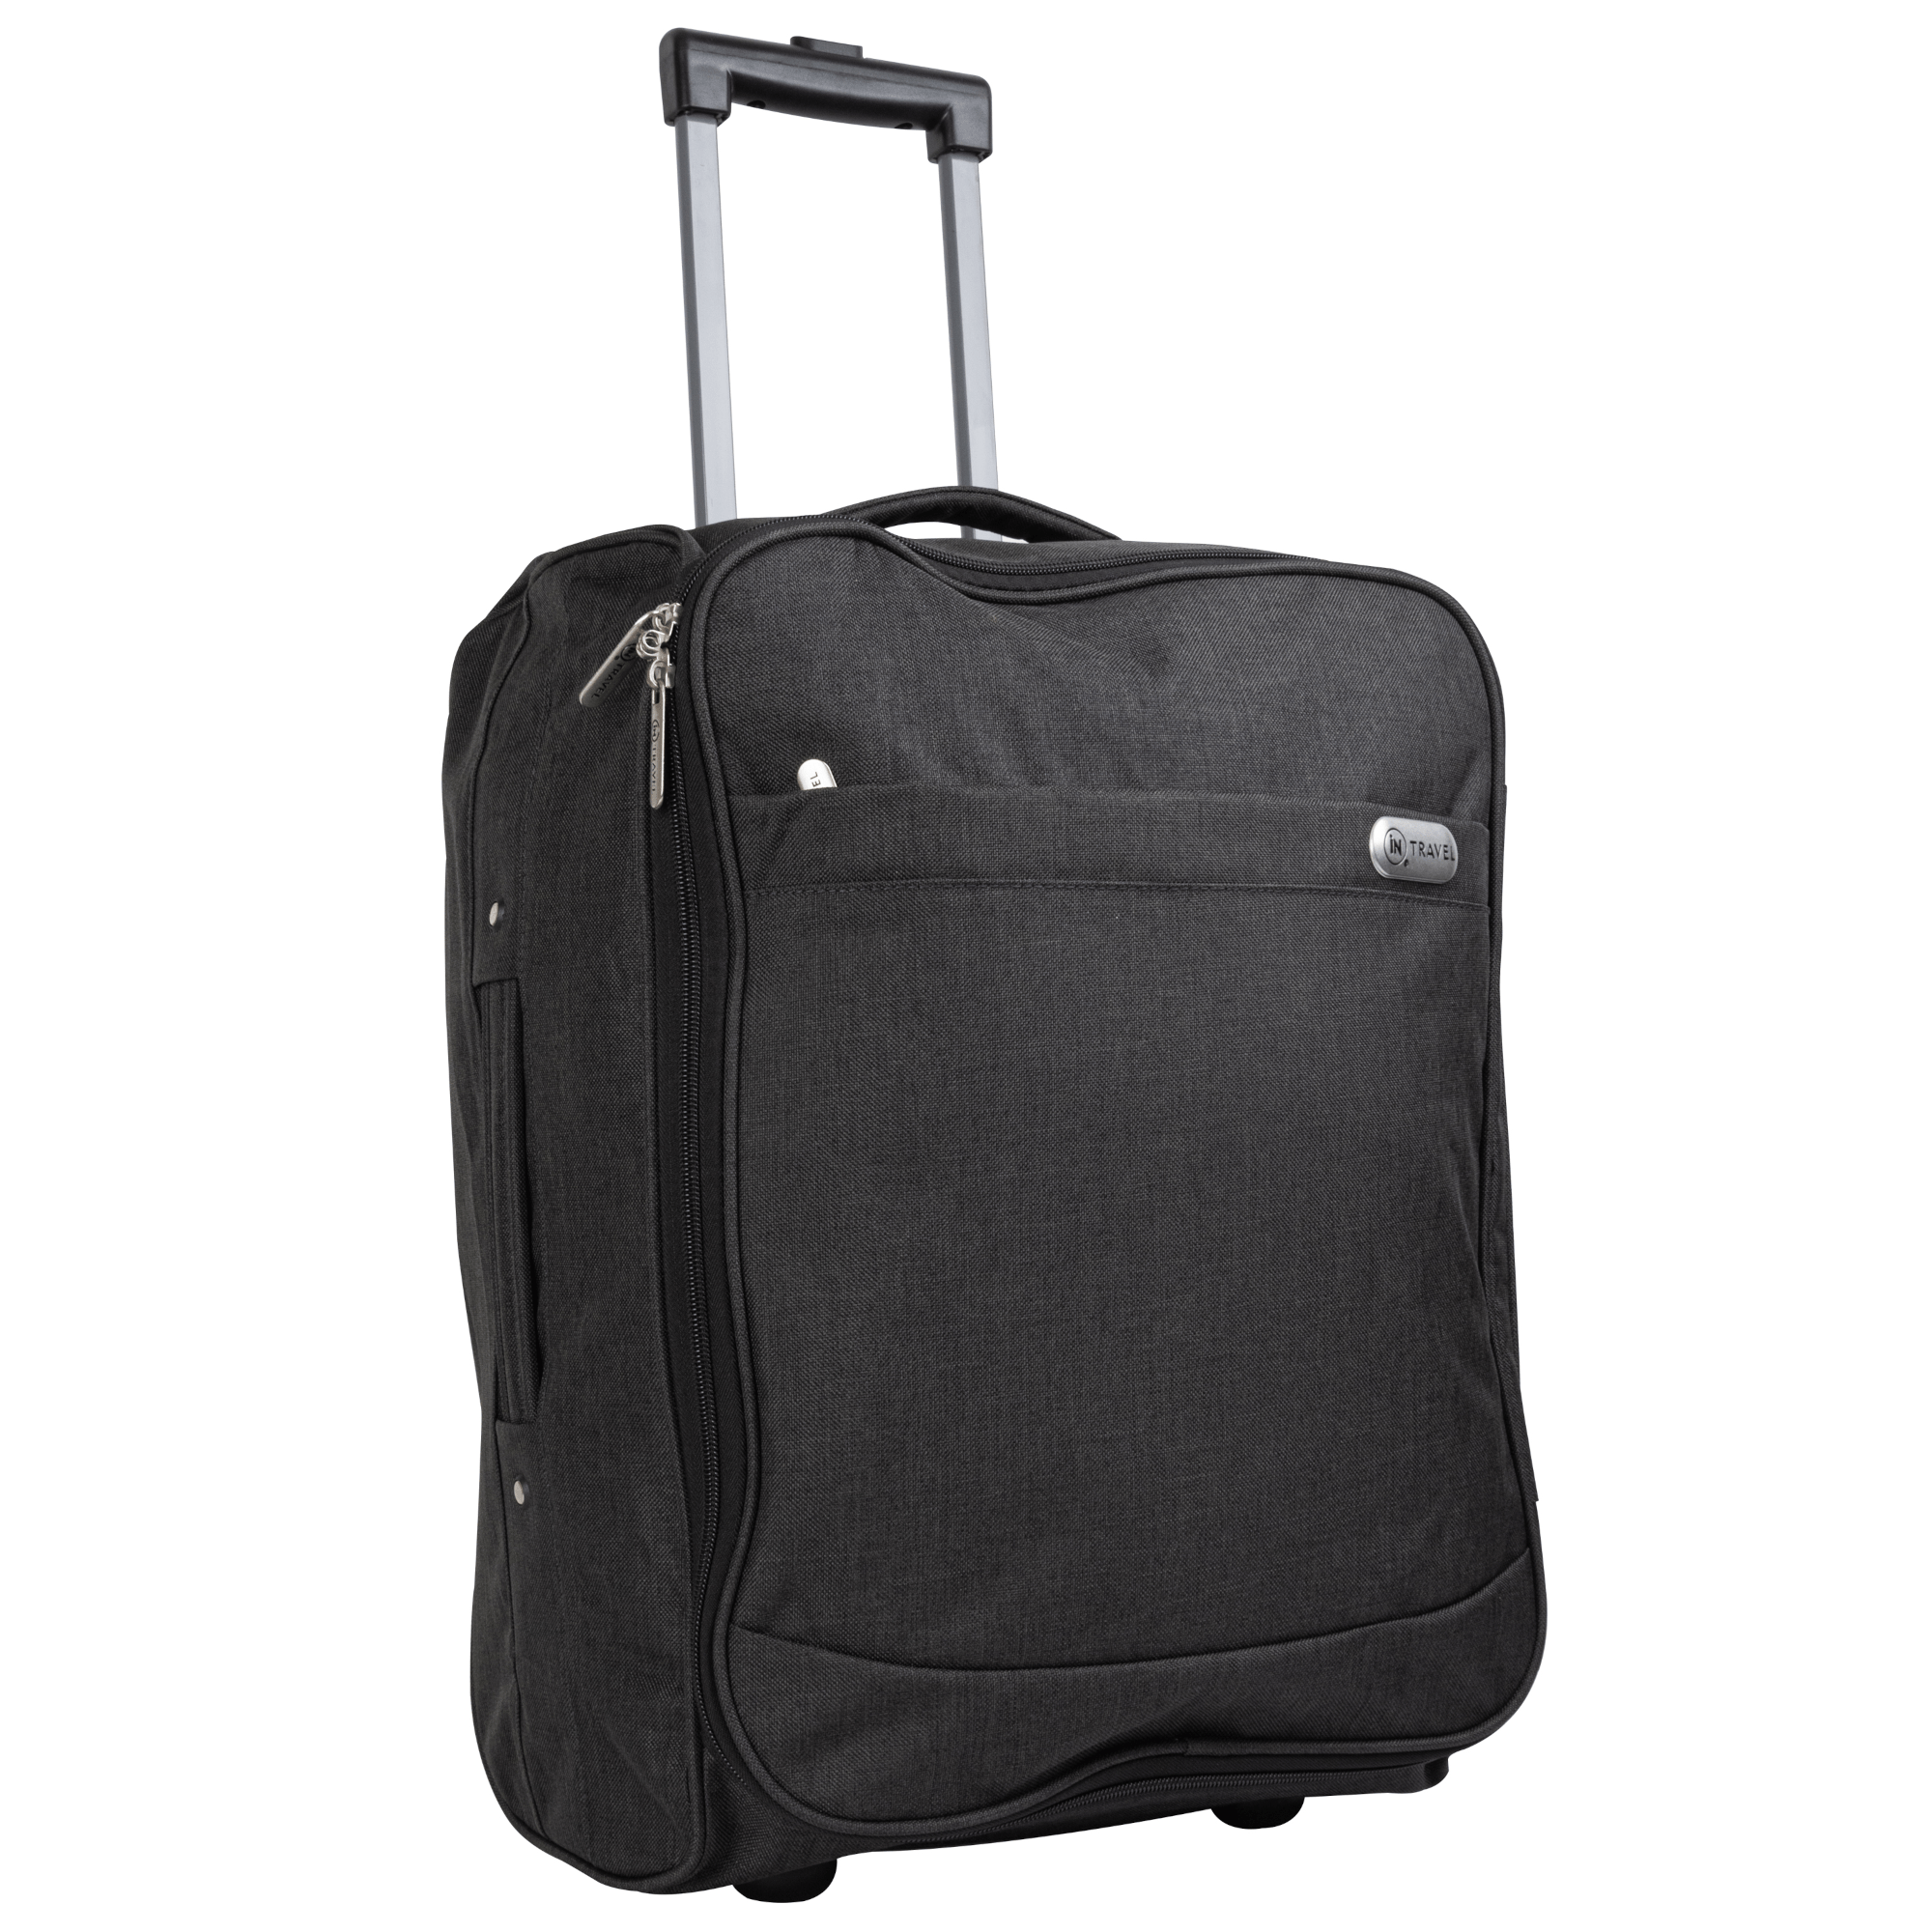 Travel Luggage Trolley with Extendable Handle on Wheels (Black) - DSL